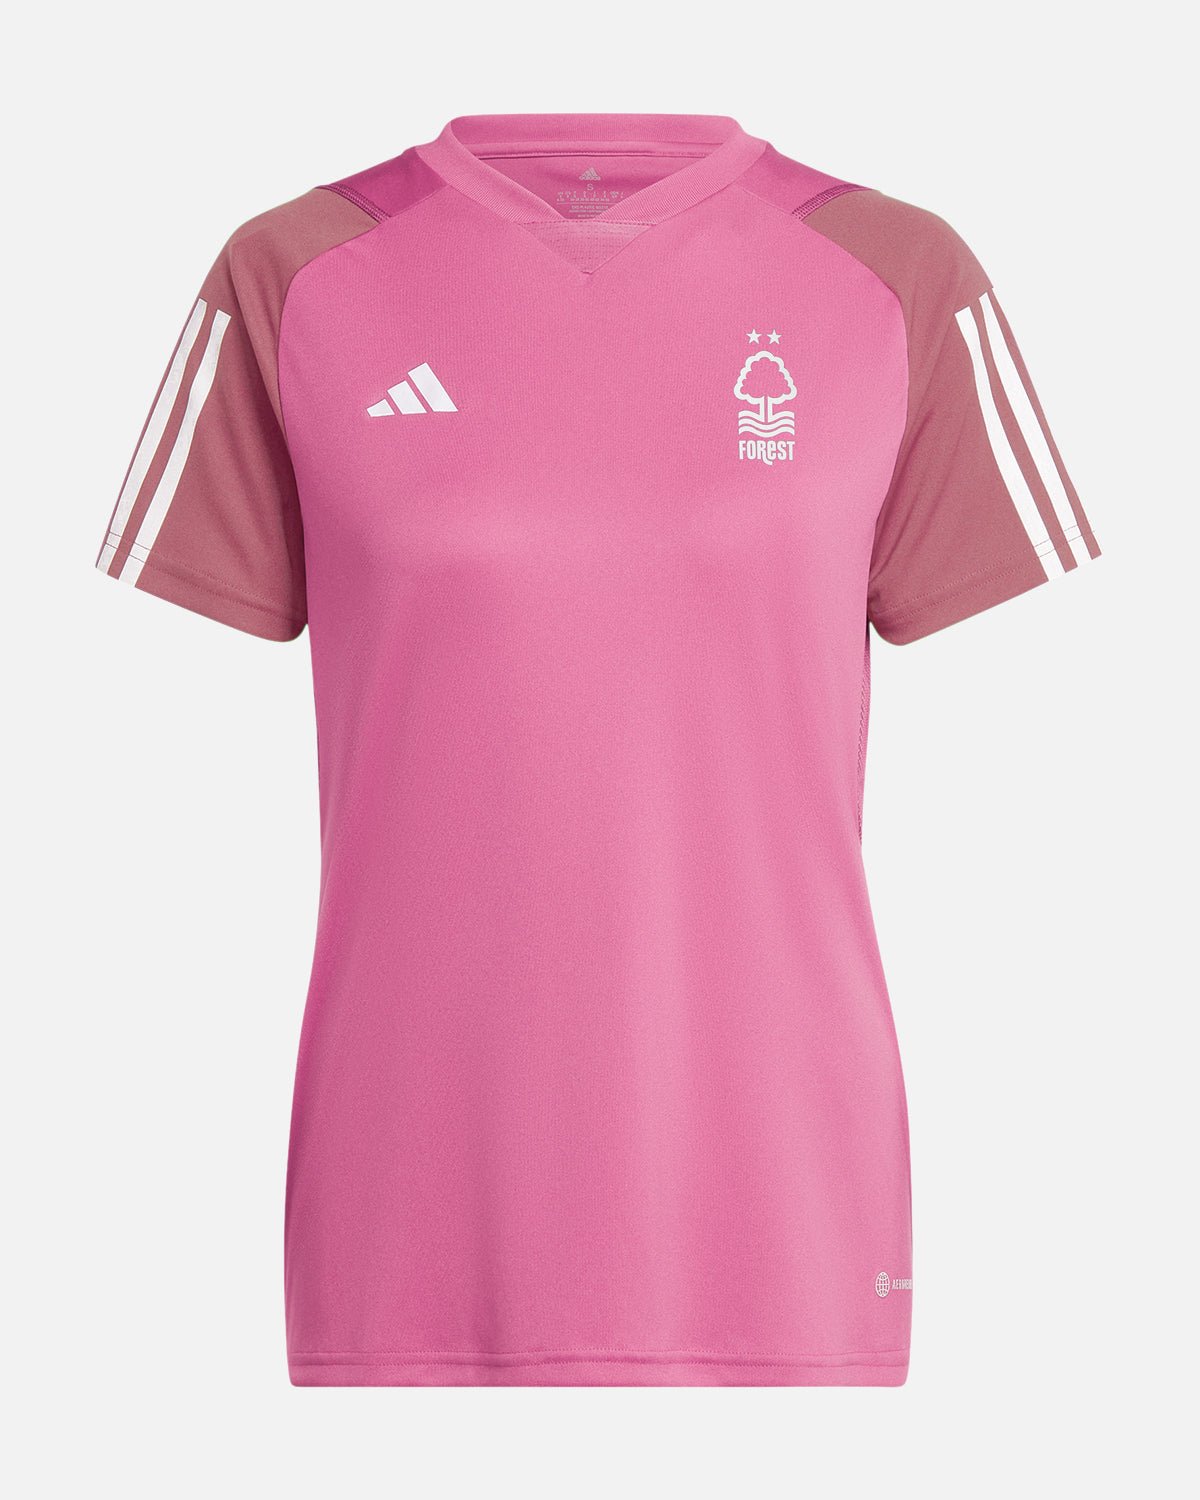 NFFC Women's Pink Warm Up Jersey 23-24 - Nottingham Forest FC